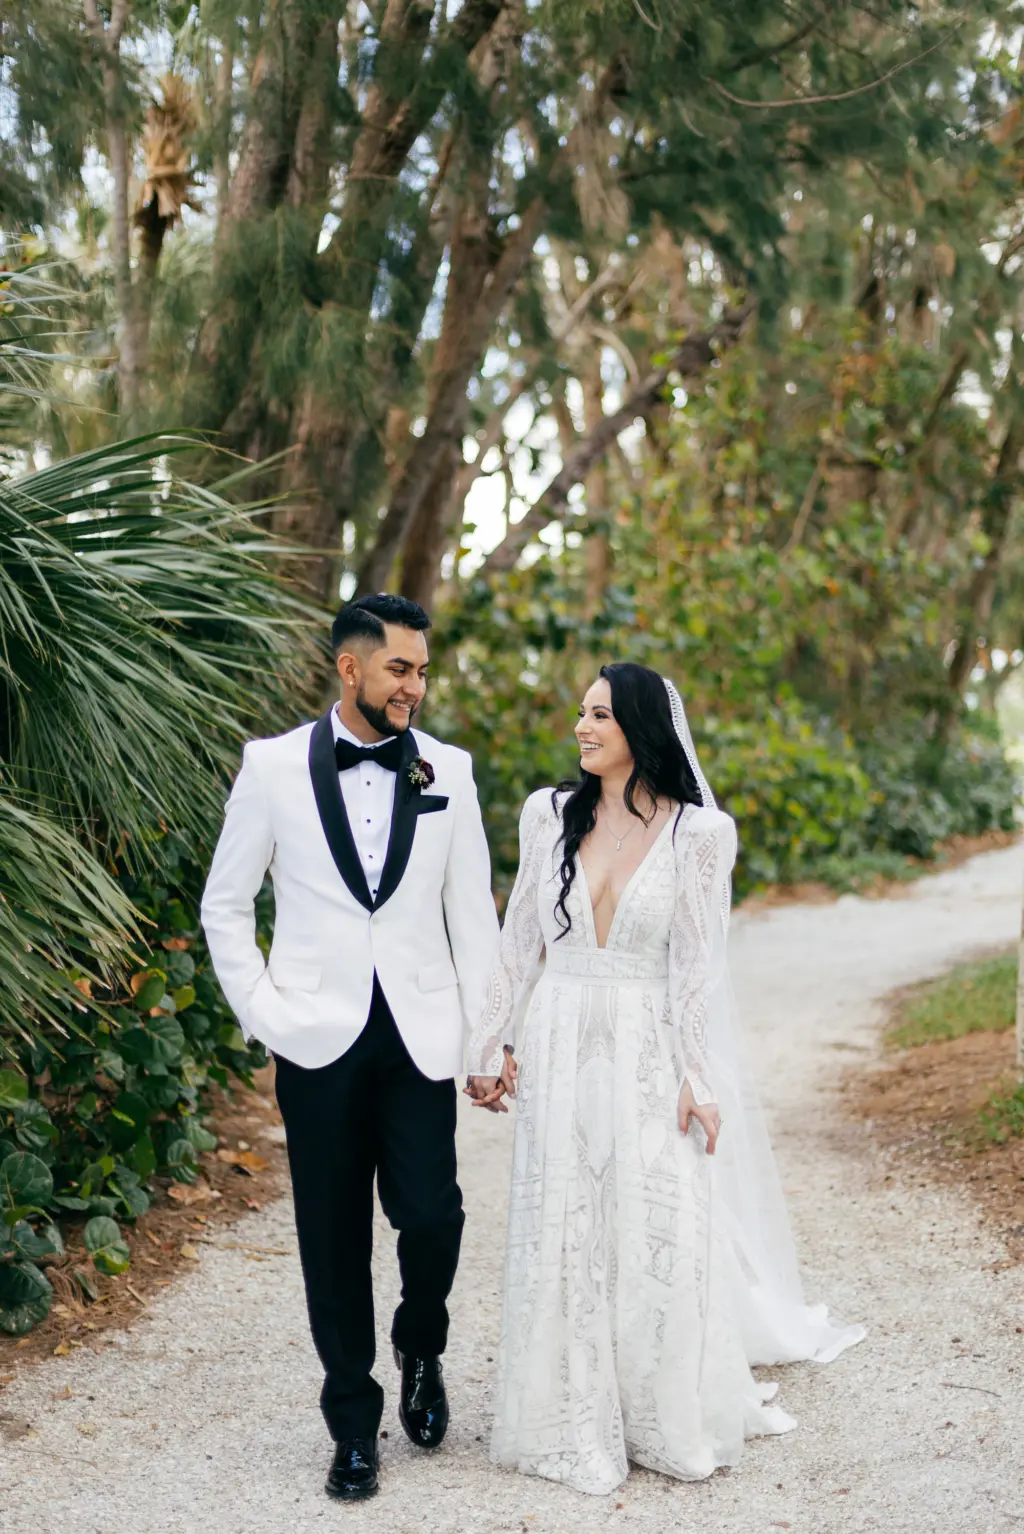 Bride and Groom First Look Wedding Portrait | Black and White Tuxedo Jacket with Satin Lapel and Bow Tie Ideas | White and Nude Boho Lace Rue de Seine Wedding Dress with Removable Sleeves